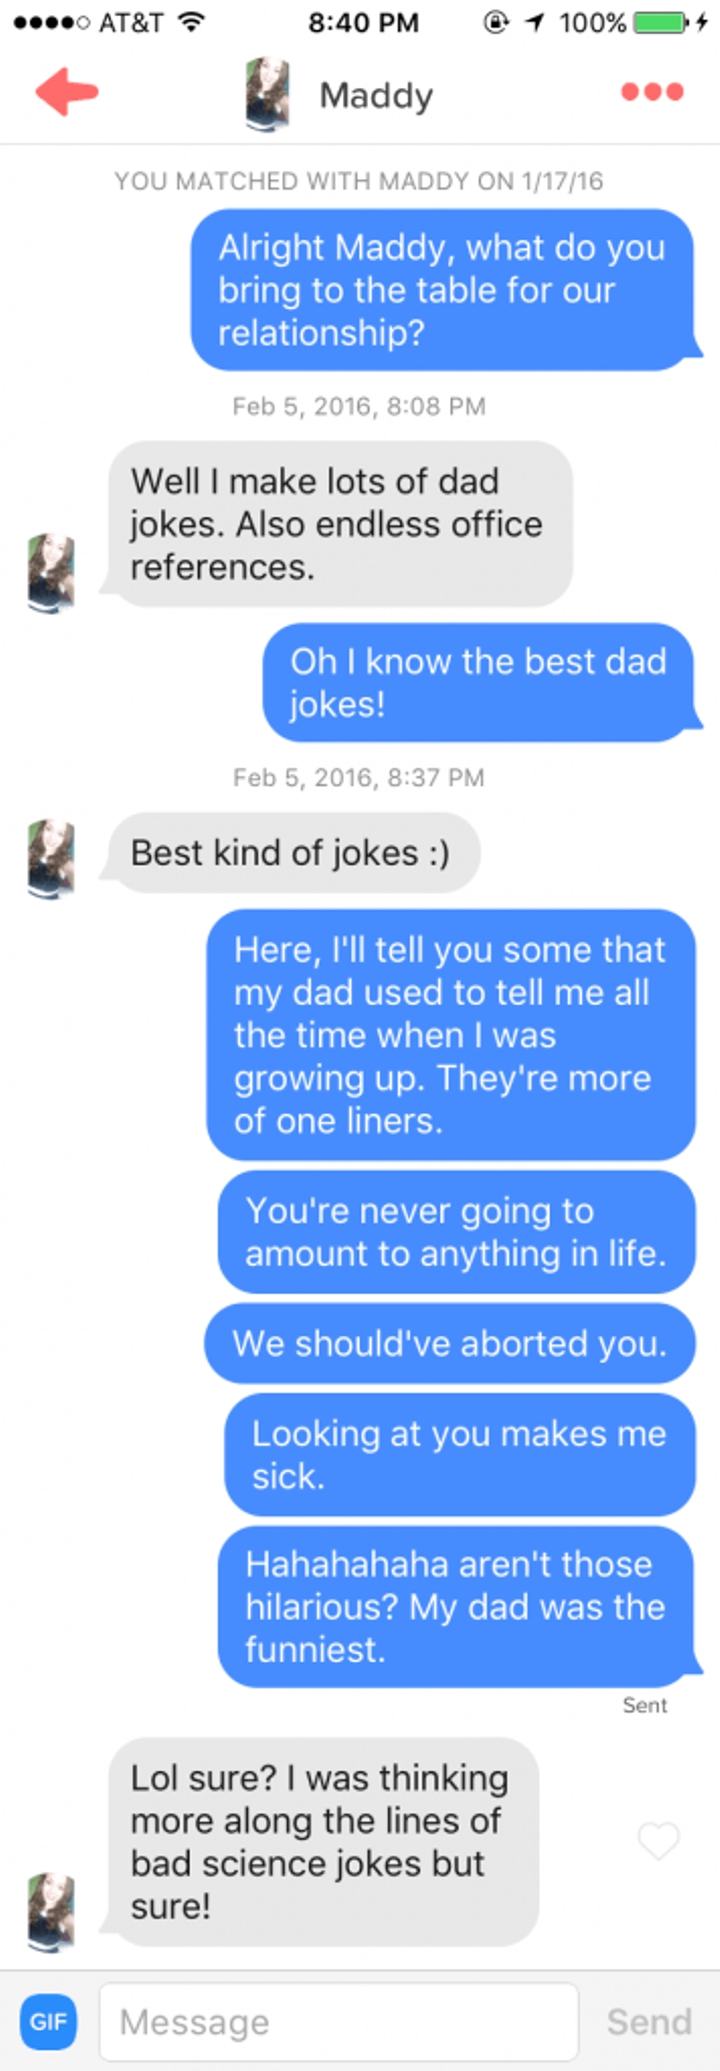 tinder chat tips for guys